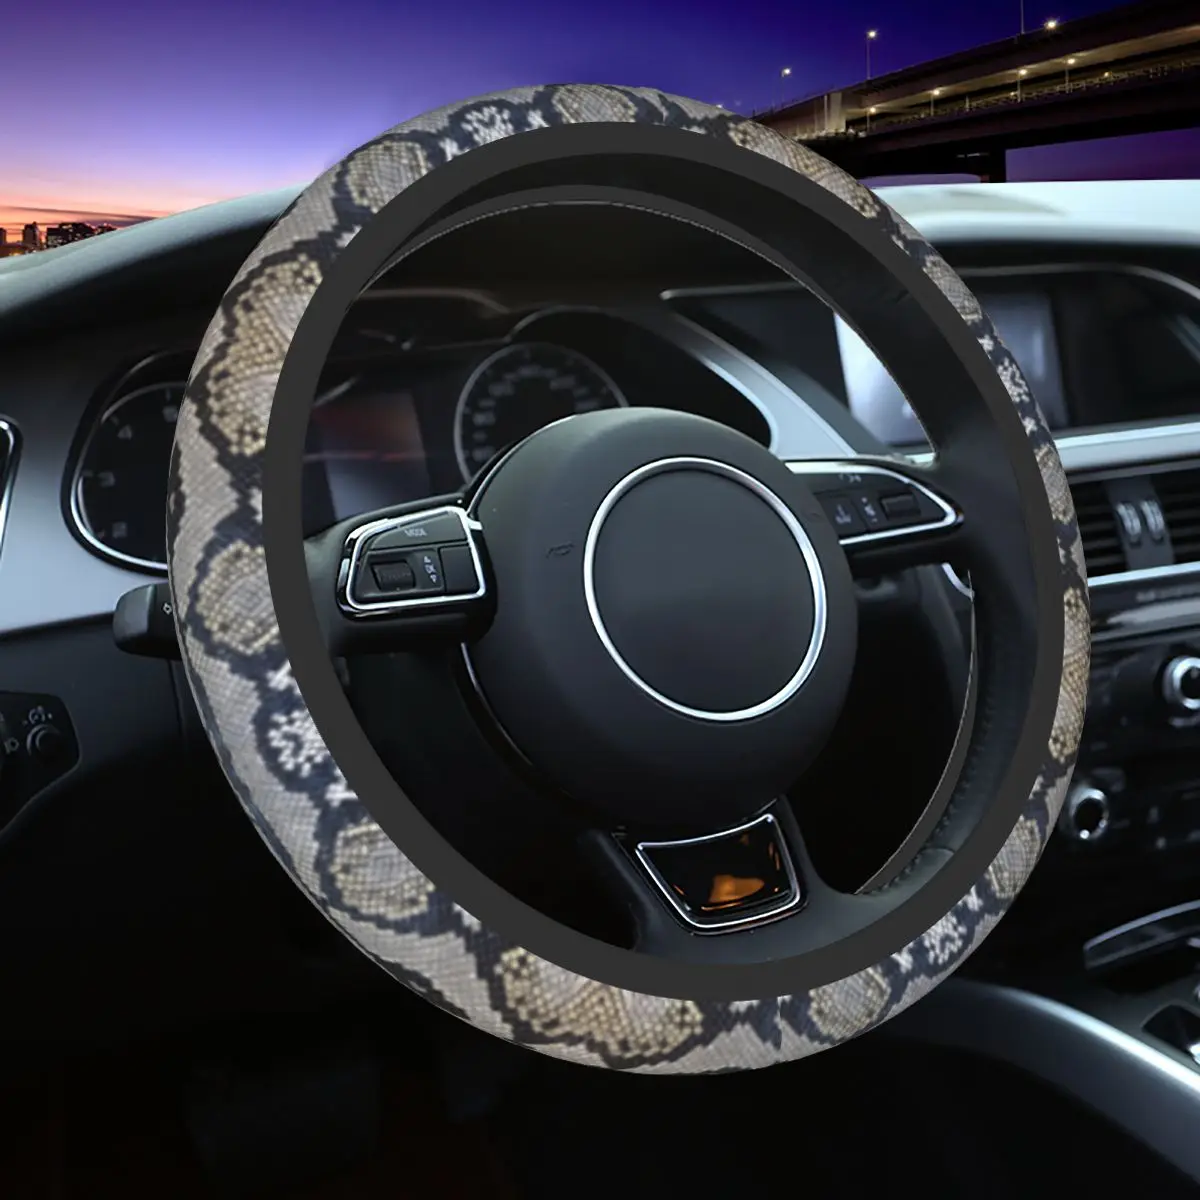 

38cm Steering Wheel Covers Python Snake Skin Texture Elastic Car-styling Colorful Automobile Accessory